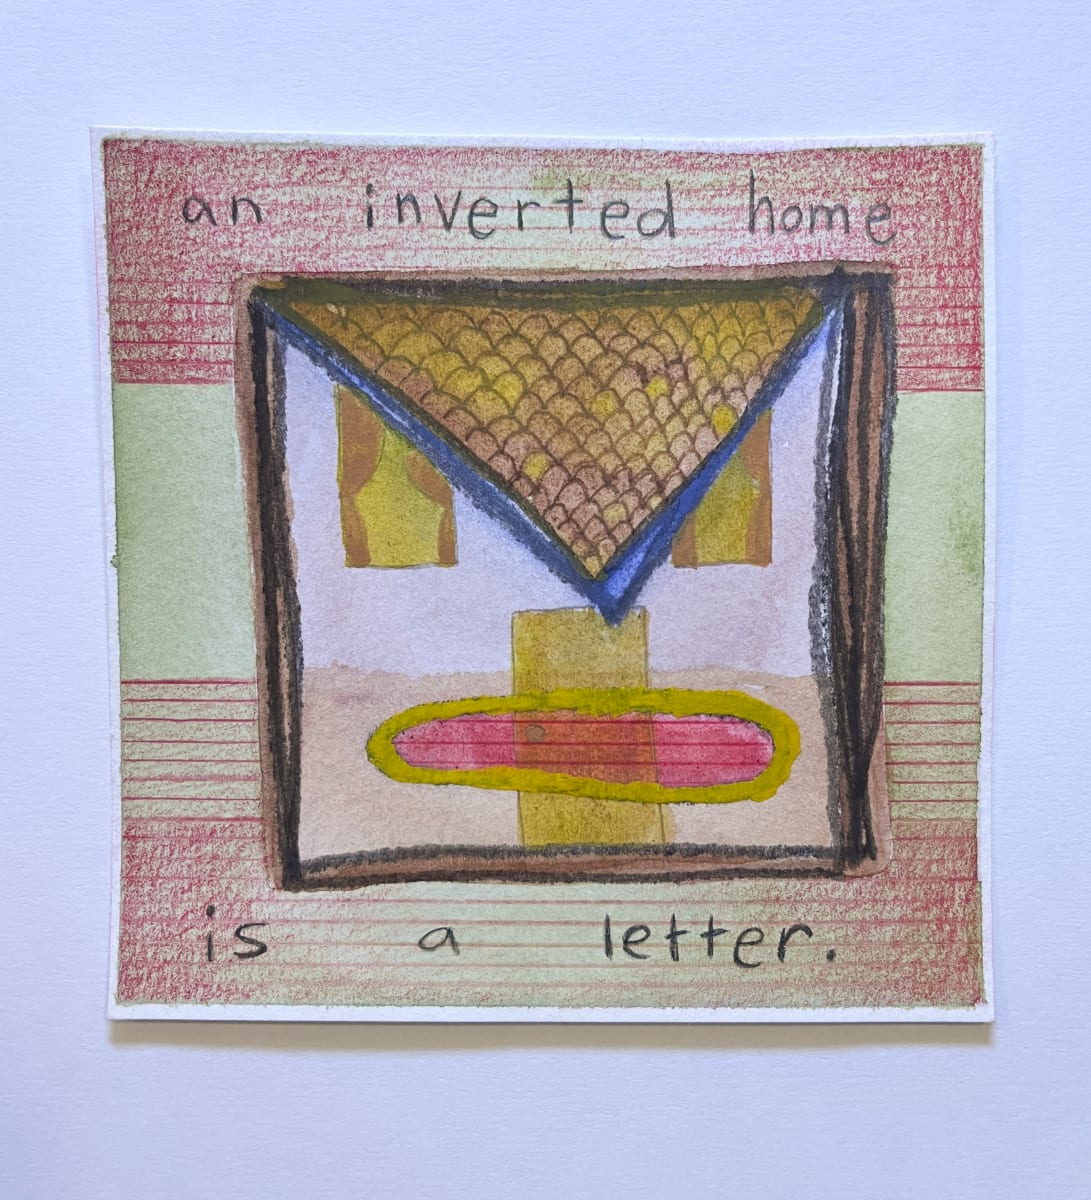 An Inverted Home is a Letter (Textured) by Carmel Dor 